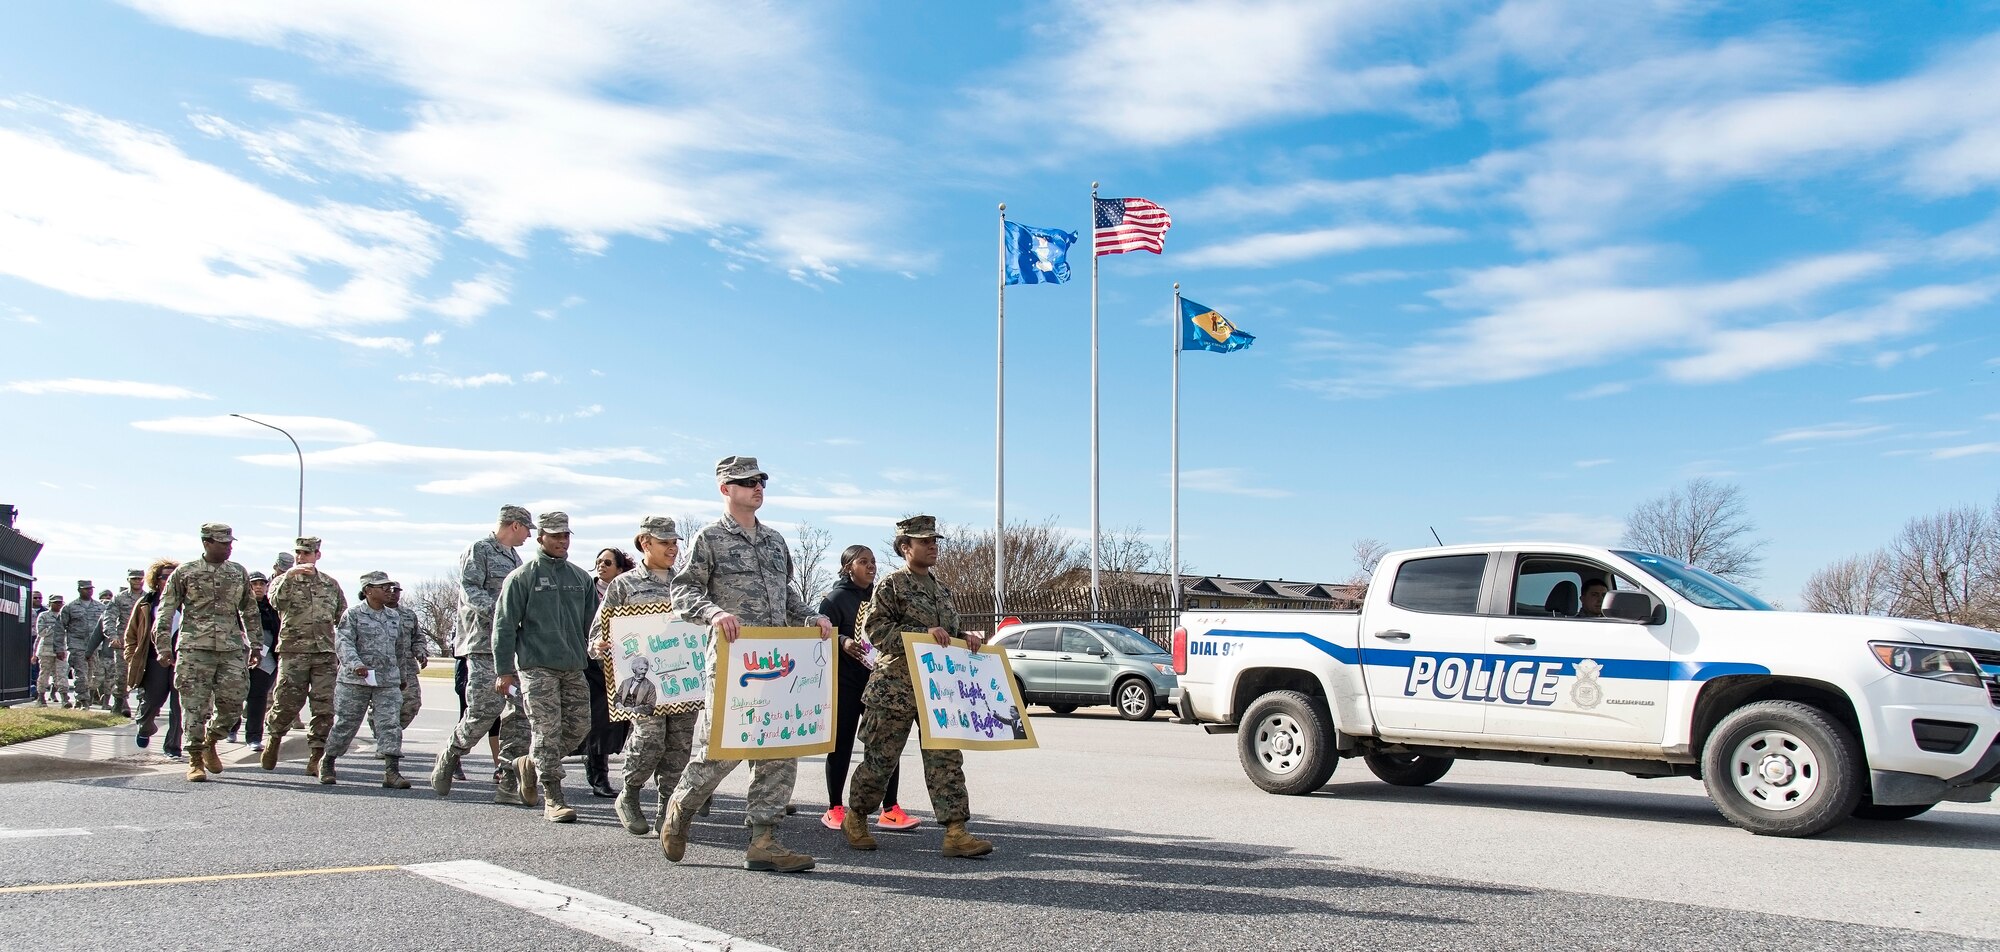 Participants in the Black History Month Unity Walk approach the main gate on their way to the base flag pole Feb. 28, 2018, on Dover Air Force Base, Del. The African-American Heritage Committee sponsored the walk here at Dover AFB and members of the 436th Security Forces Squadron provided escort and traffic control for the walk. (U.S. Air Force photo by Roland Balik)